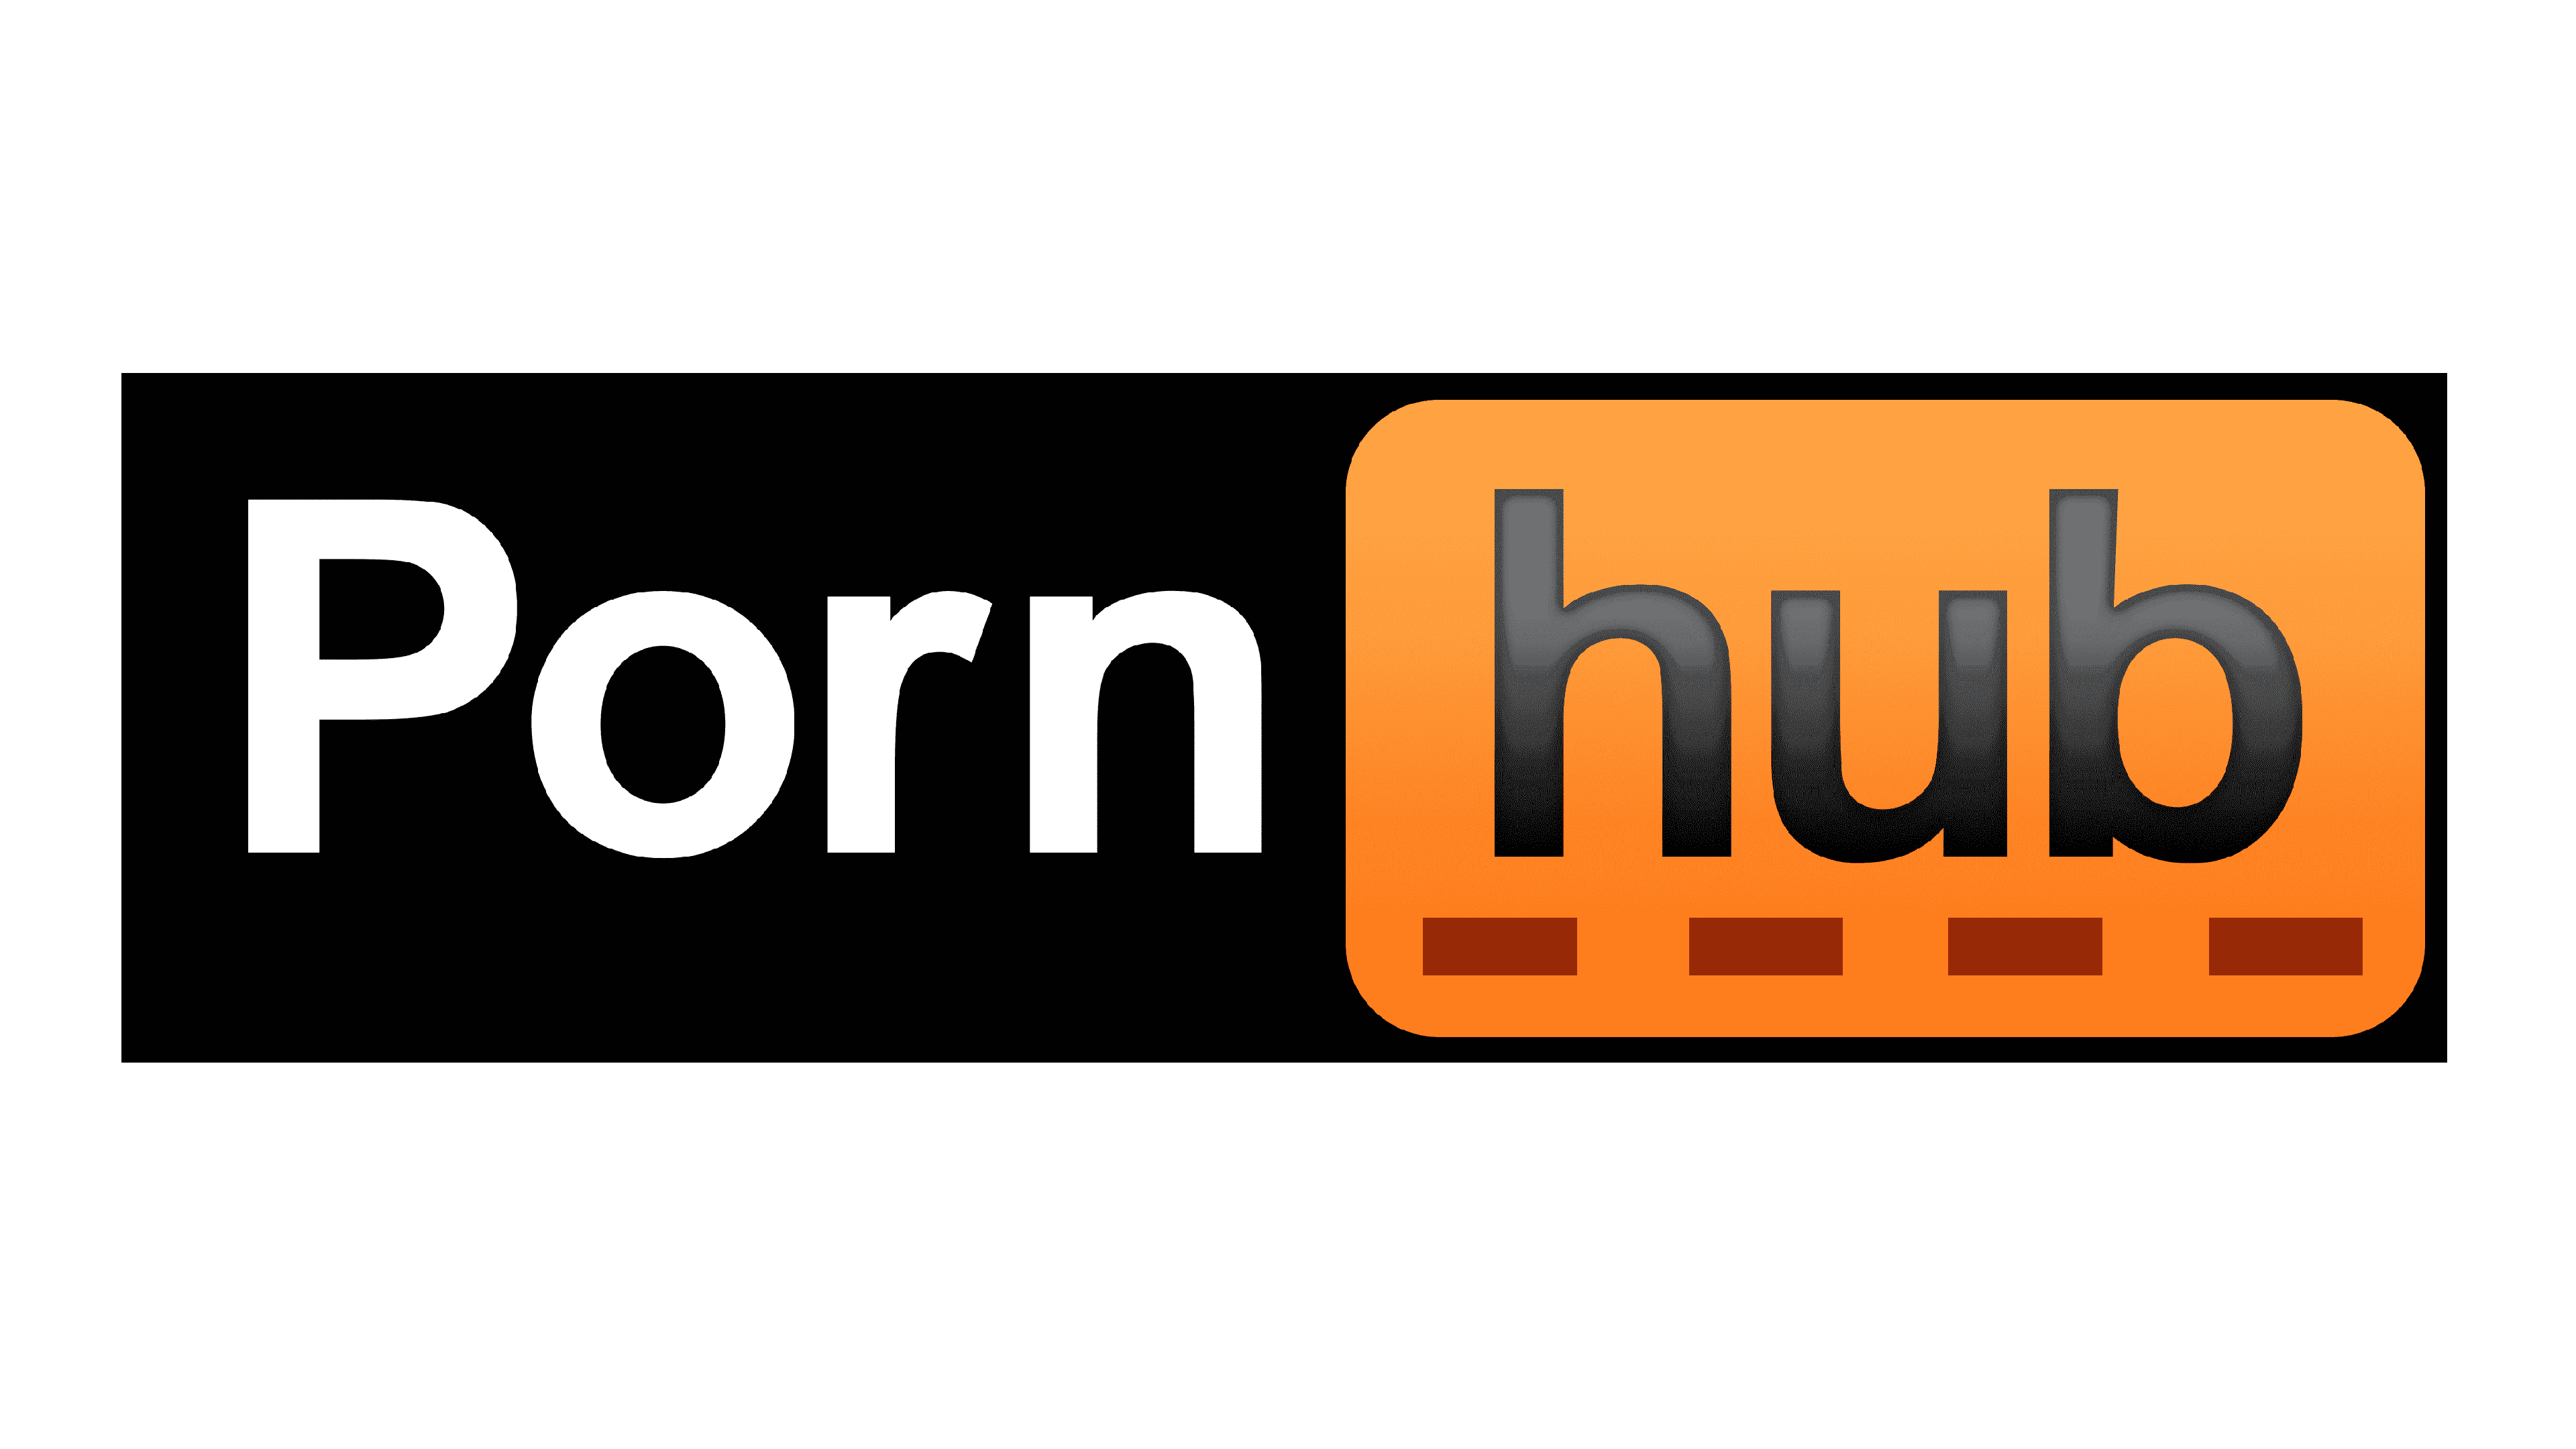 Prunhob - Pornhub Logo and symbol, meaning, history, PNG, new